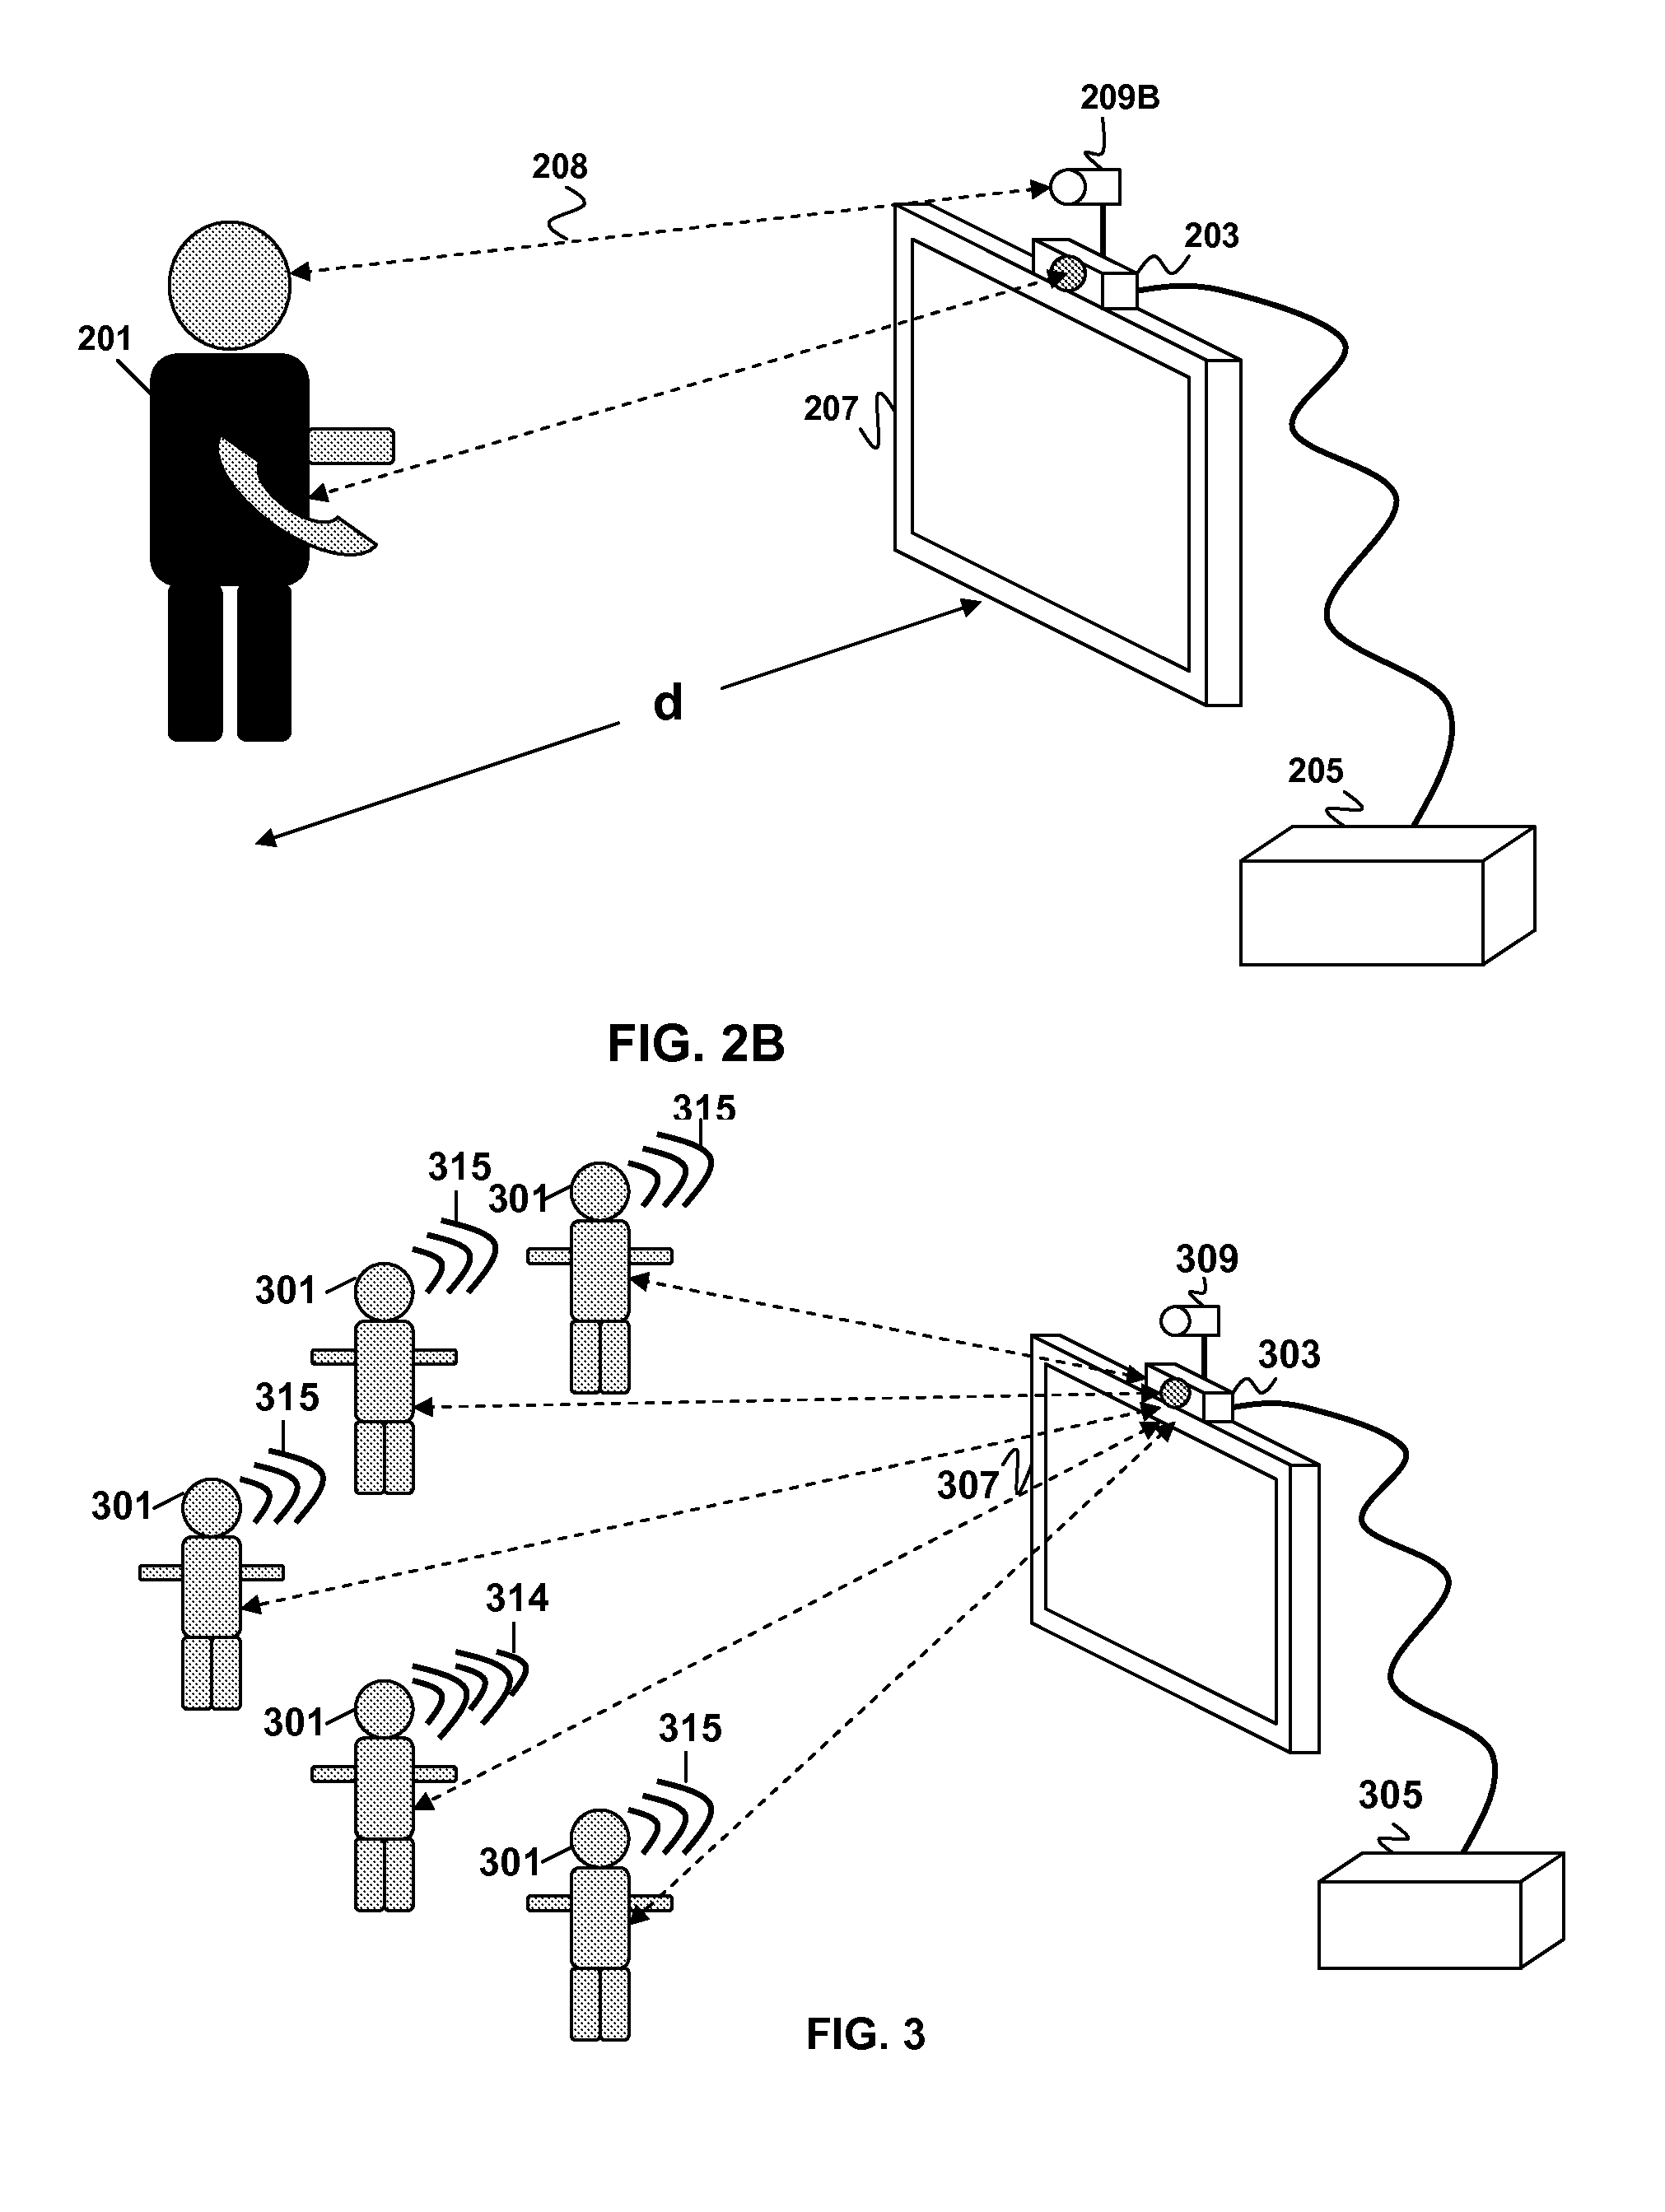 User interface system and method using thermal imaging